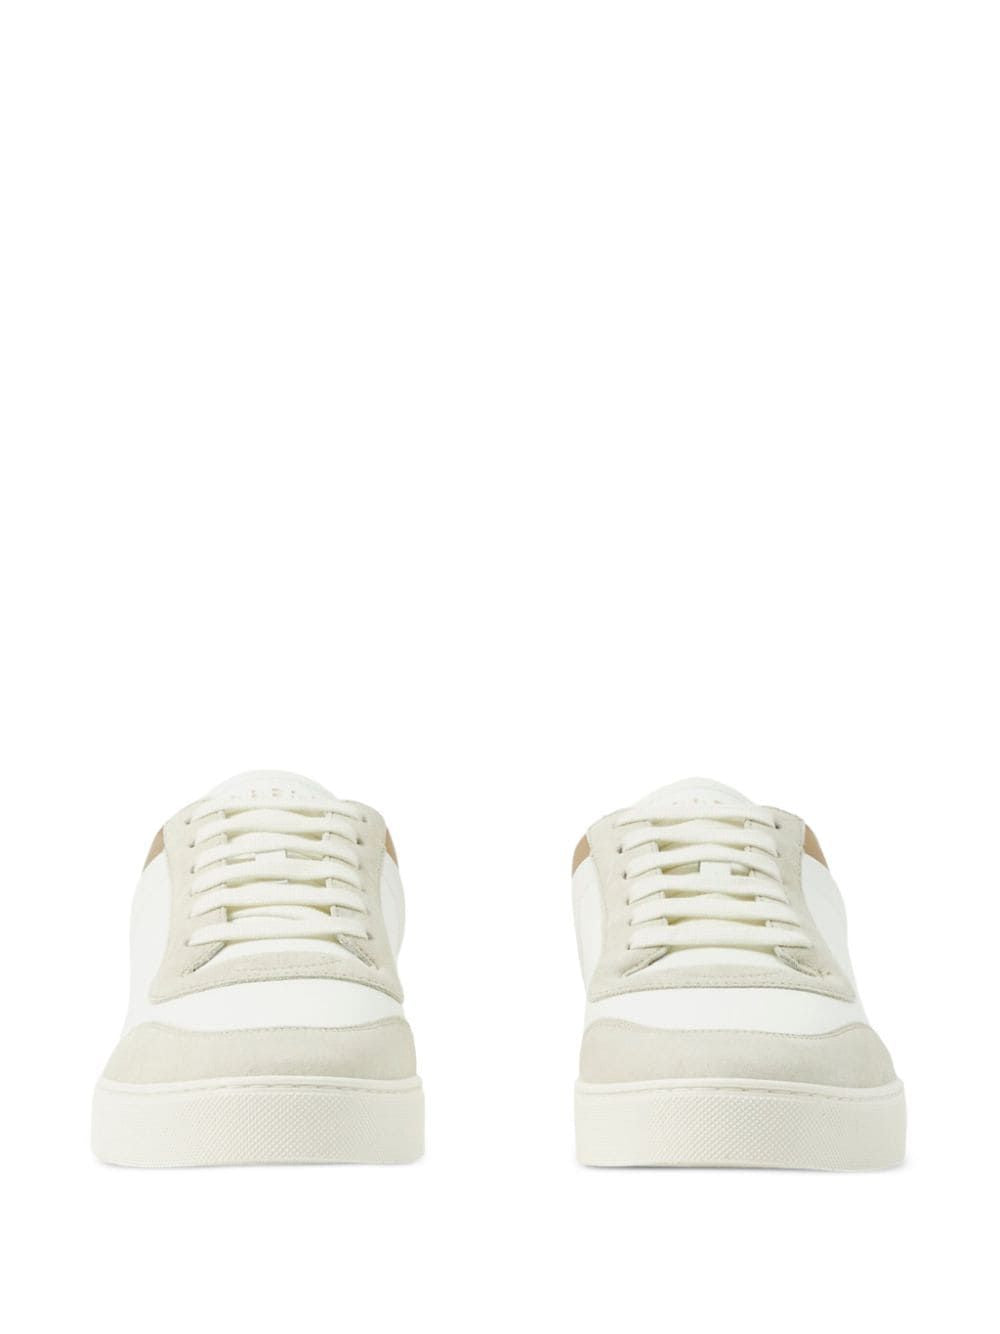 Shop Burberry Classic White Leather Sneakers For Men